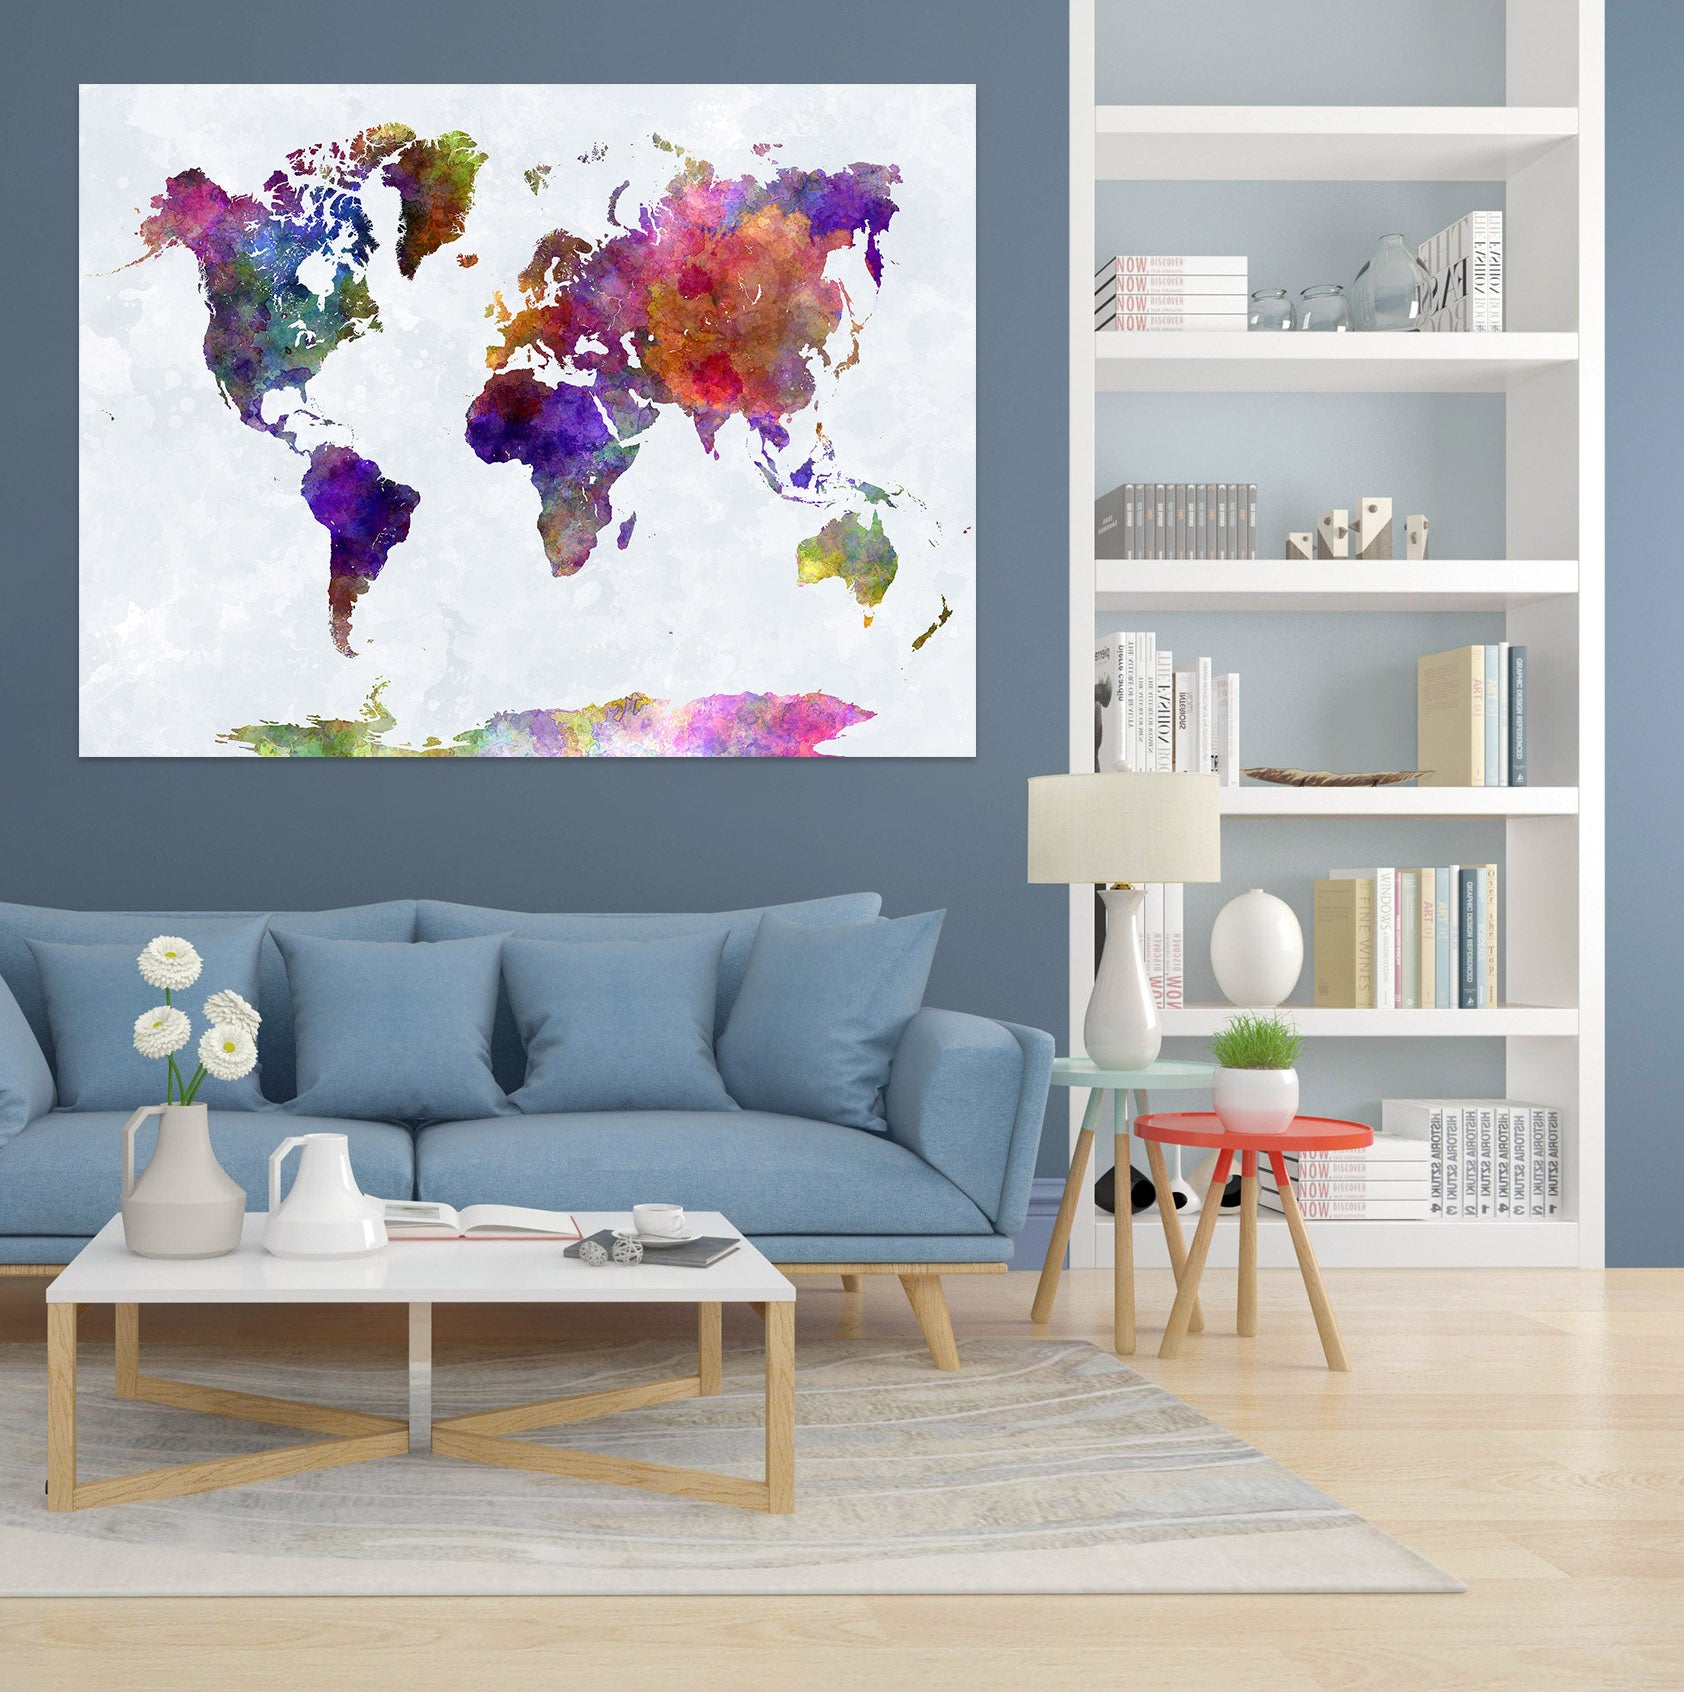 3D Colored Clouds 111 World Map Wall Sticker